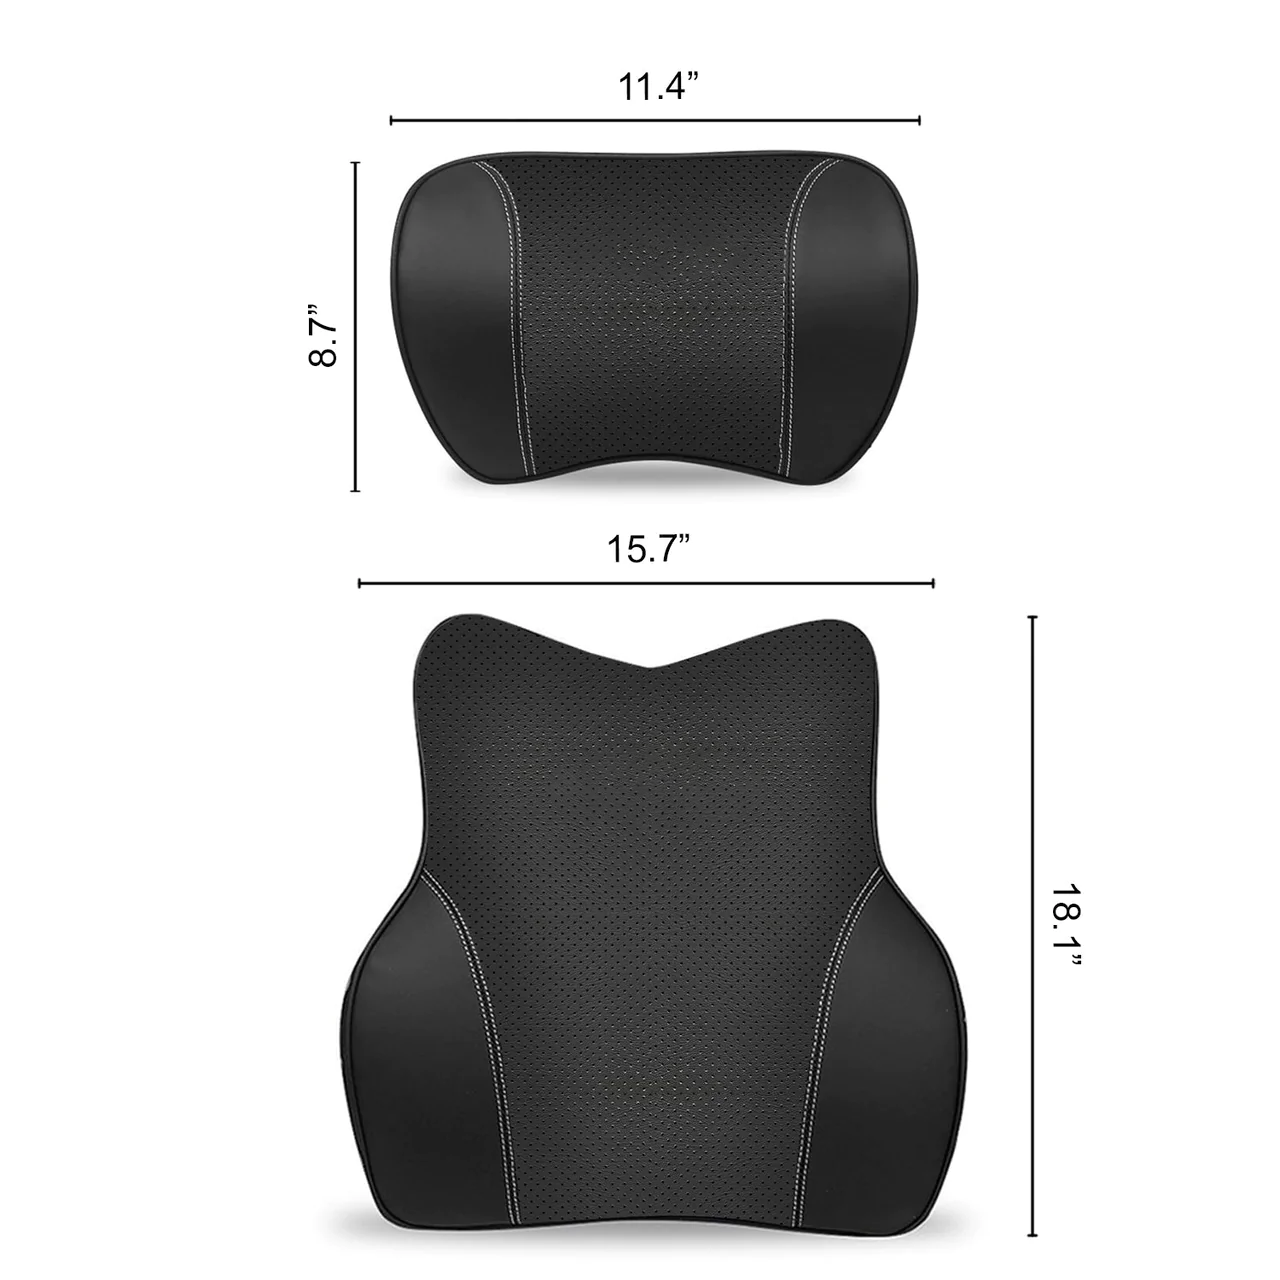 Custom Text For Car Headrest Neck Pillow and Lumbar Support Back Cushion Kit, Compatible with All Cars, Memory Foam Erognomic Design Universal Fit Muscle Pain and Tension Relief for Car Seat JE13992